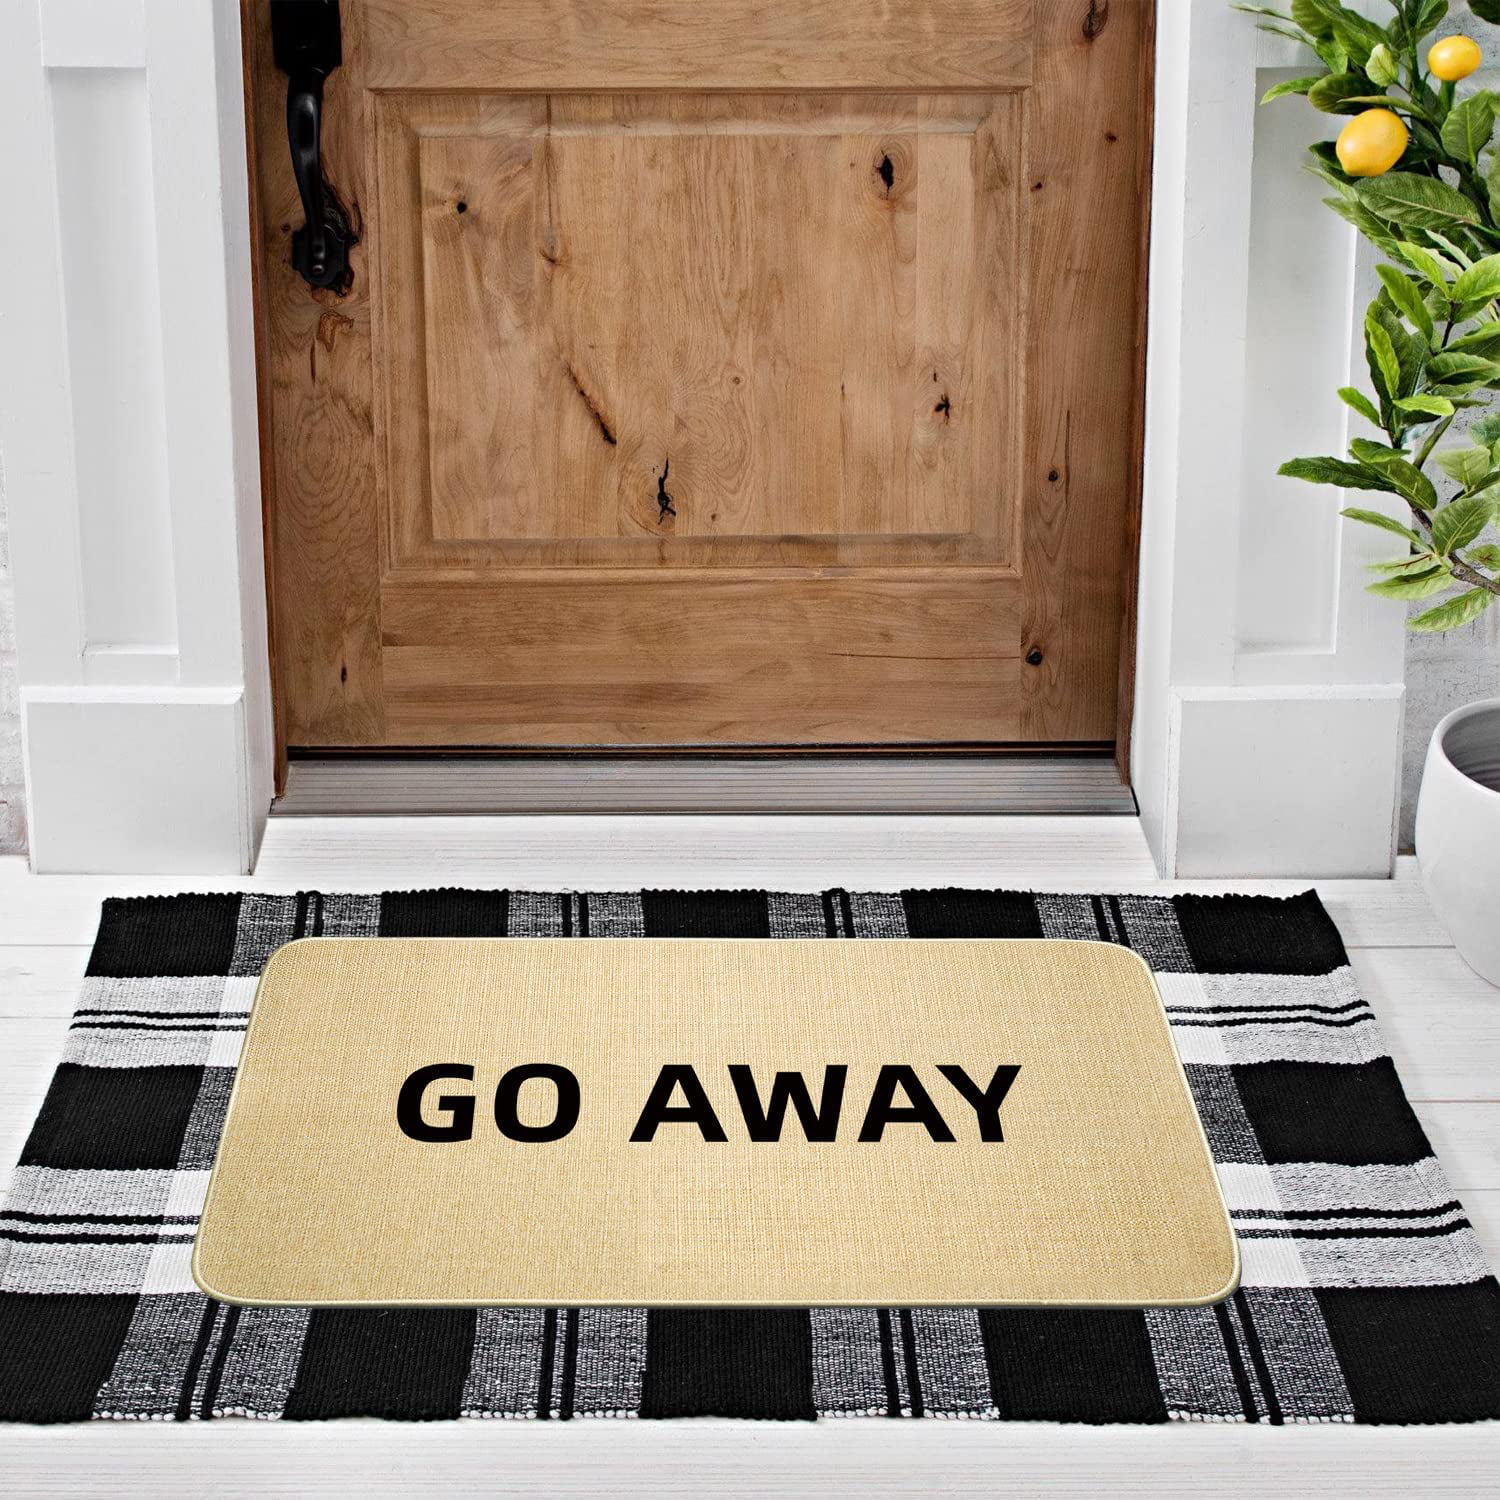 Fsqjgq Durable Carpet Area Rugs Mudroom Rug If You Hear Me Yelling Just Know I Said It Nicely 26 Times The Mom Carpet Door Mat Non Slip Entrance Door